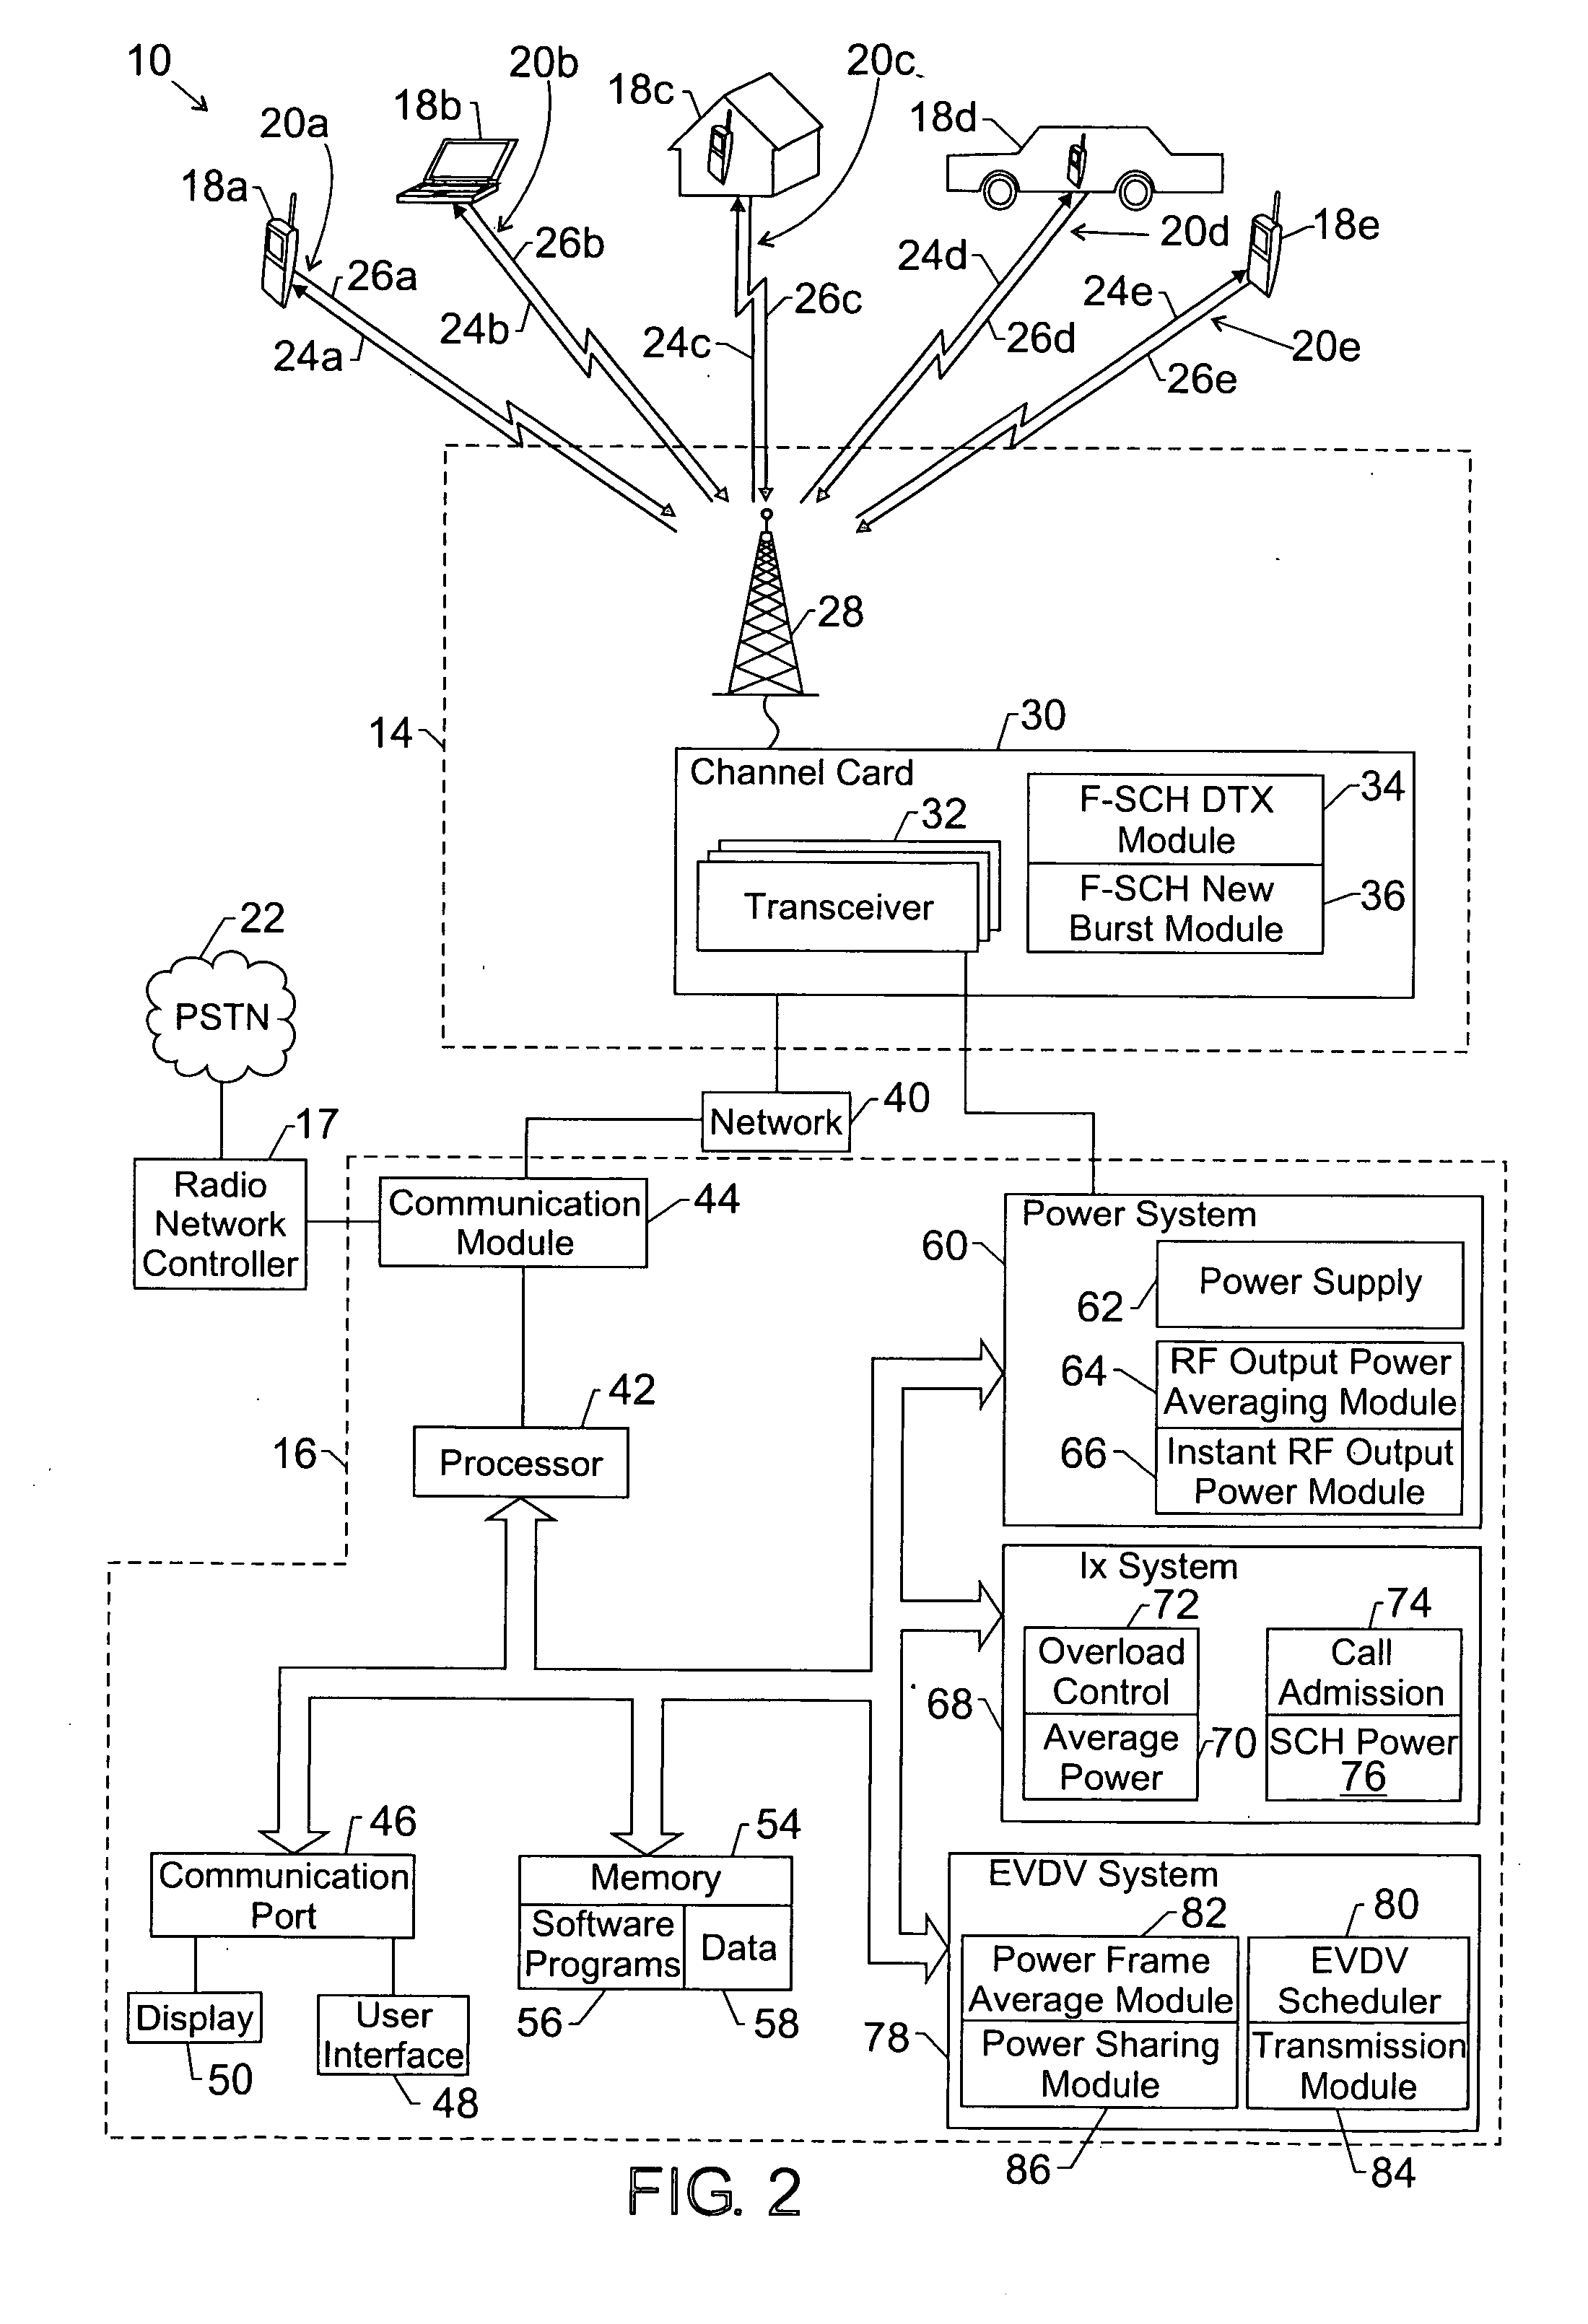 Power sharing process in cellular network architecture